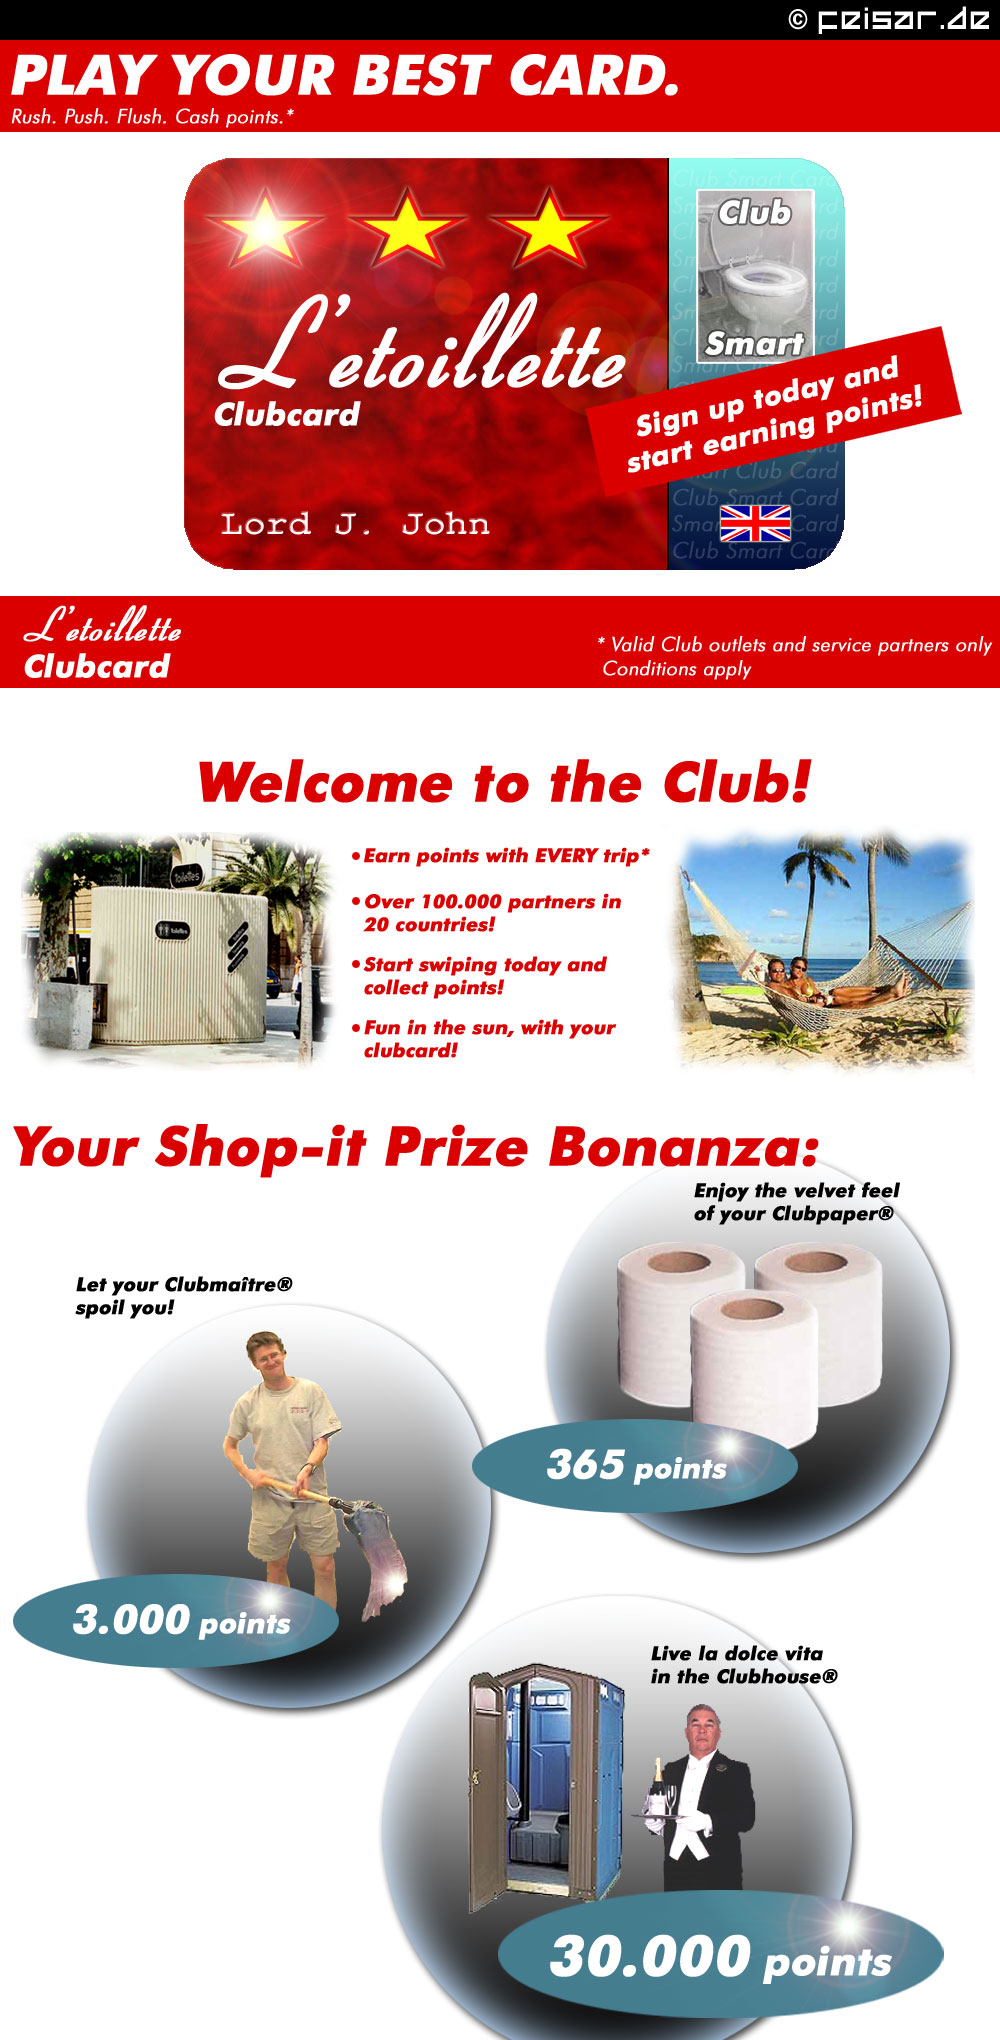 PLAY YOUR BEST CARD.
Rush. Push. Flush. Cash points. *
L'etoilette CLUBCARD
Club Smart
Sign up today and start earning points!
Lord J. John
* Valid Club outlets and service partners only
Conditions apply
Welcome to the Club!
* Earn points with EVERY trip*
* Over 100.000 partners in 20 countries!
* Start swiping today and collect points!
* Fun in the sun, with you clubcard!
Your Shop-It Prize Bonanza:
* Enjoy the velvet feel of you Clubpaper® 365 points
* Let your Clubmaître® spoil you! 3000 points
* Live la dolce vita in the Clubhouse® 30000 points